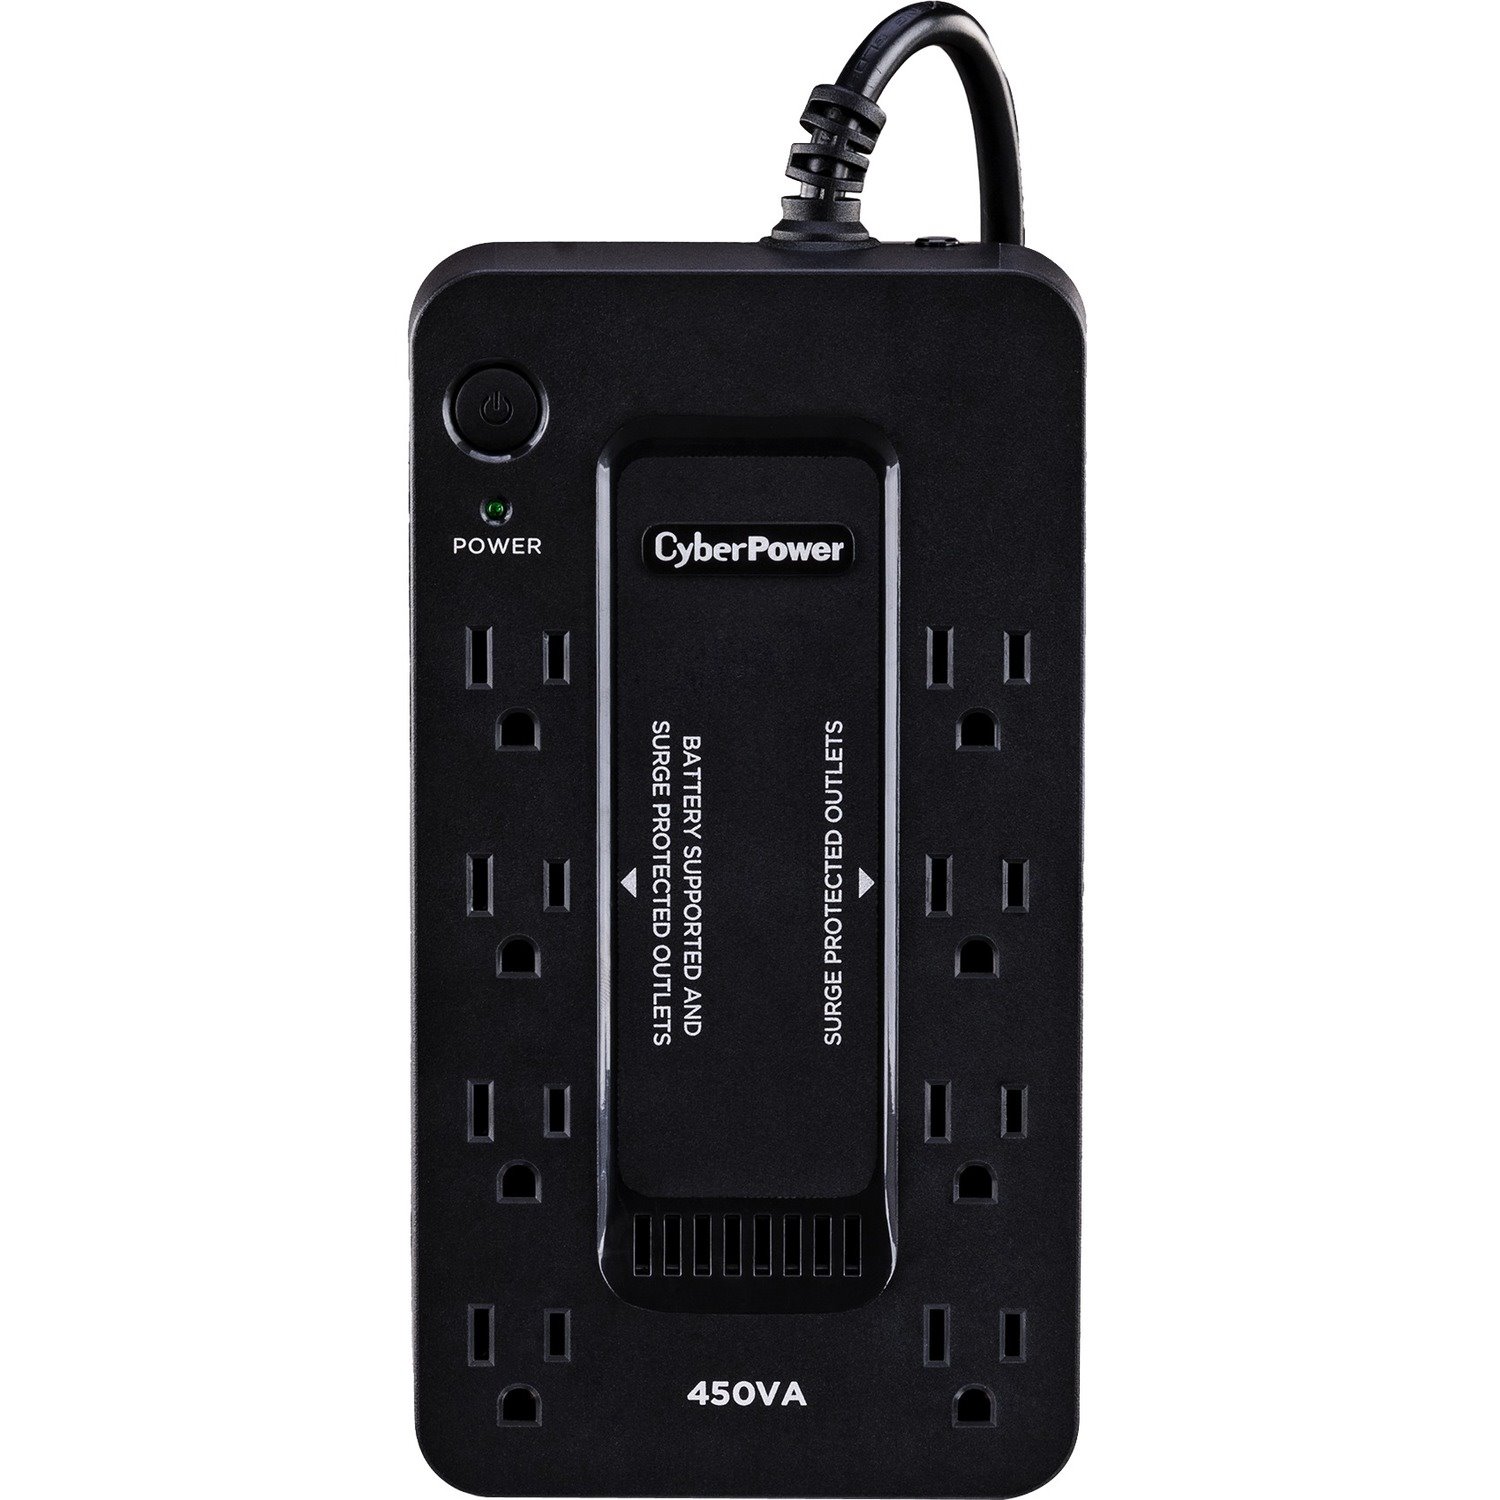 CyberPower SE450G1-FC Battery Backup UPS Systems